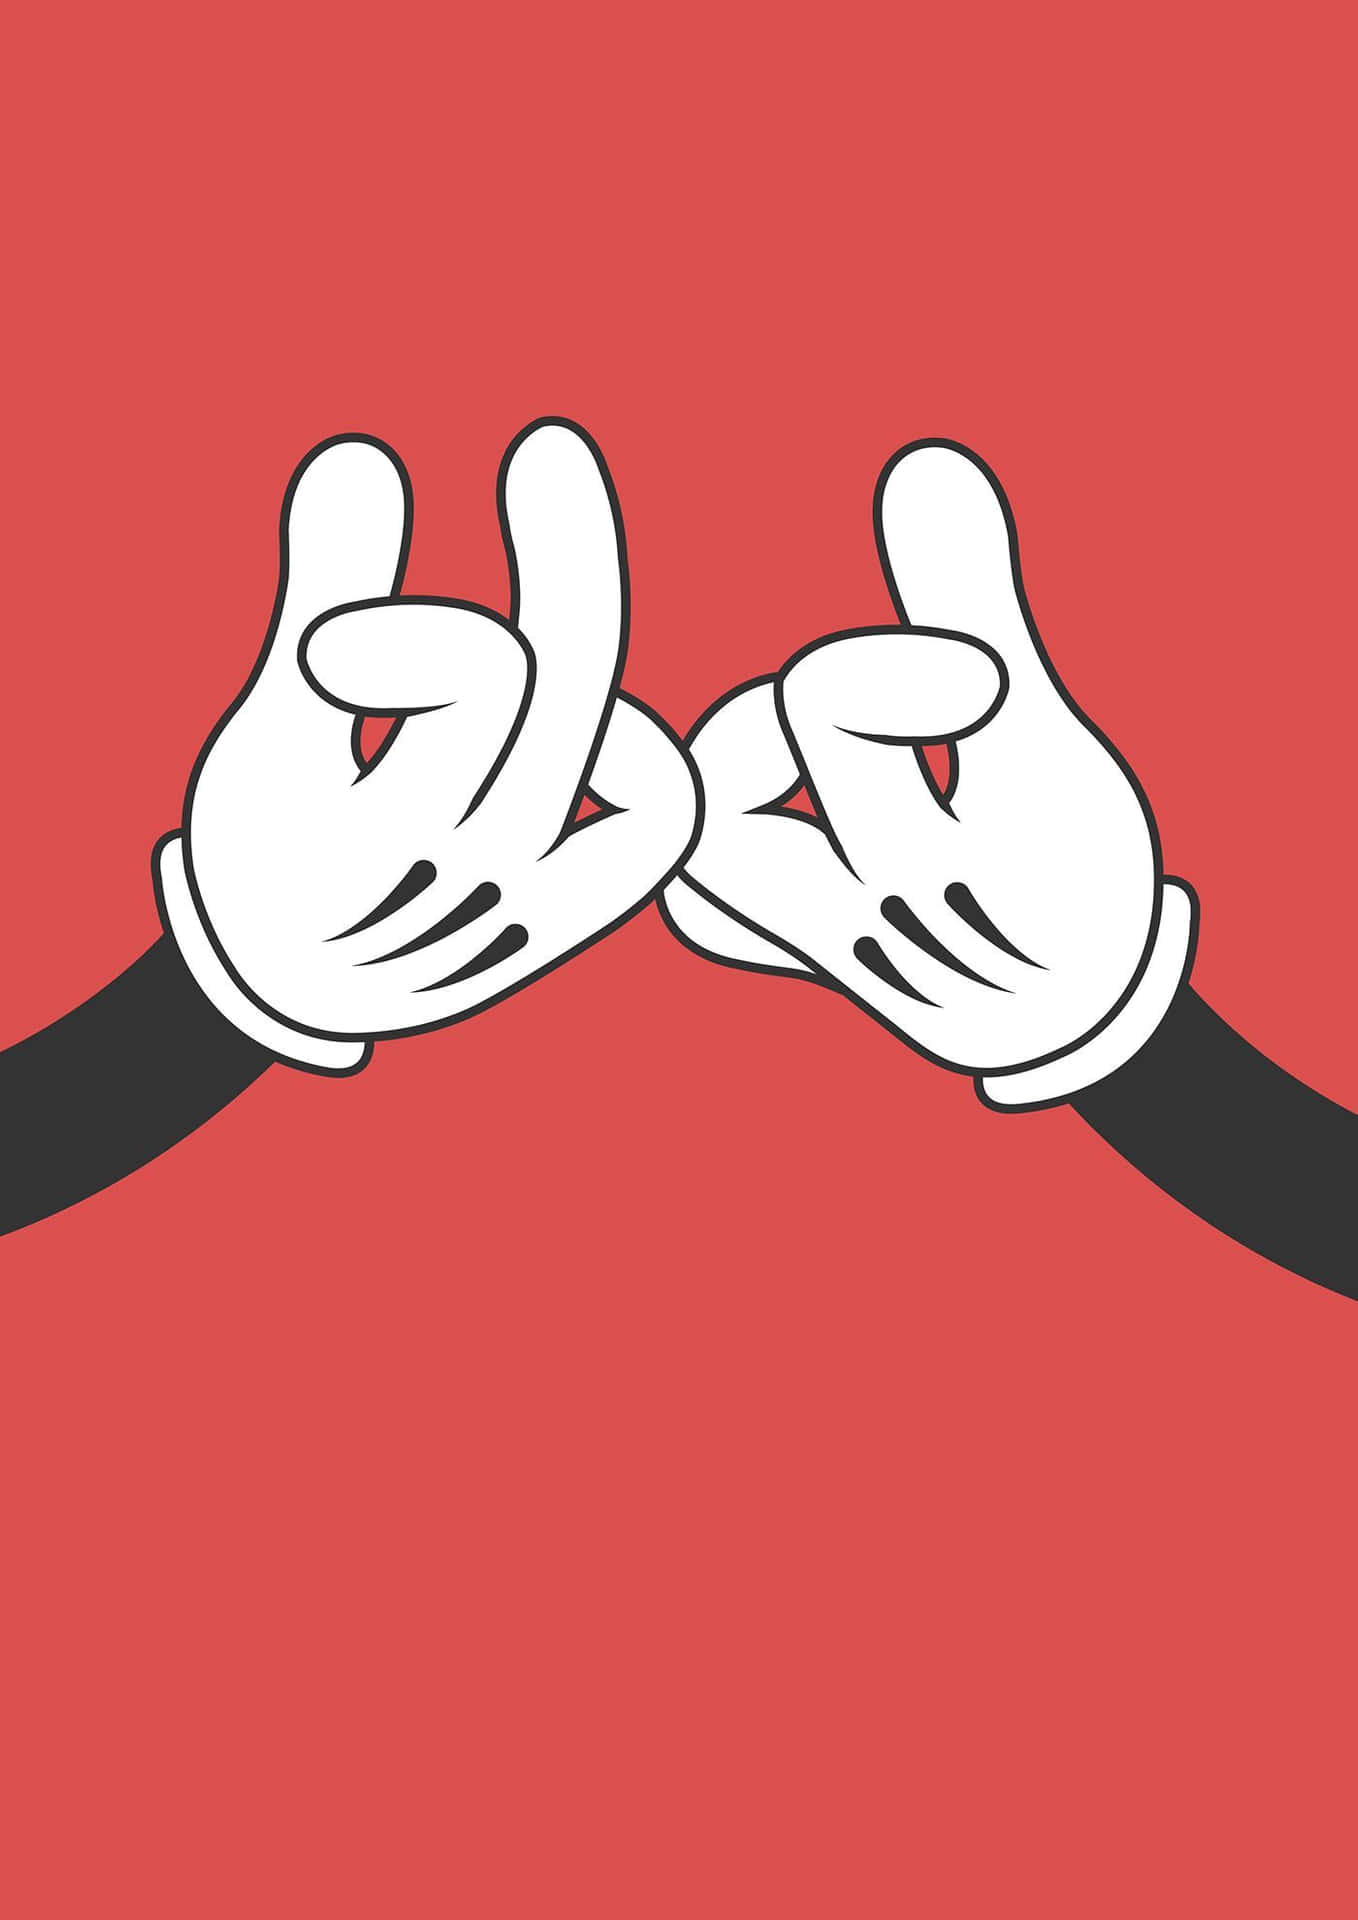 Two Mickey Mouse Hands Making A Gesture Wallpaper